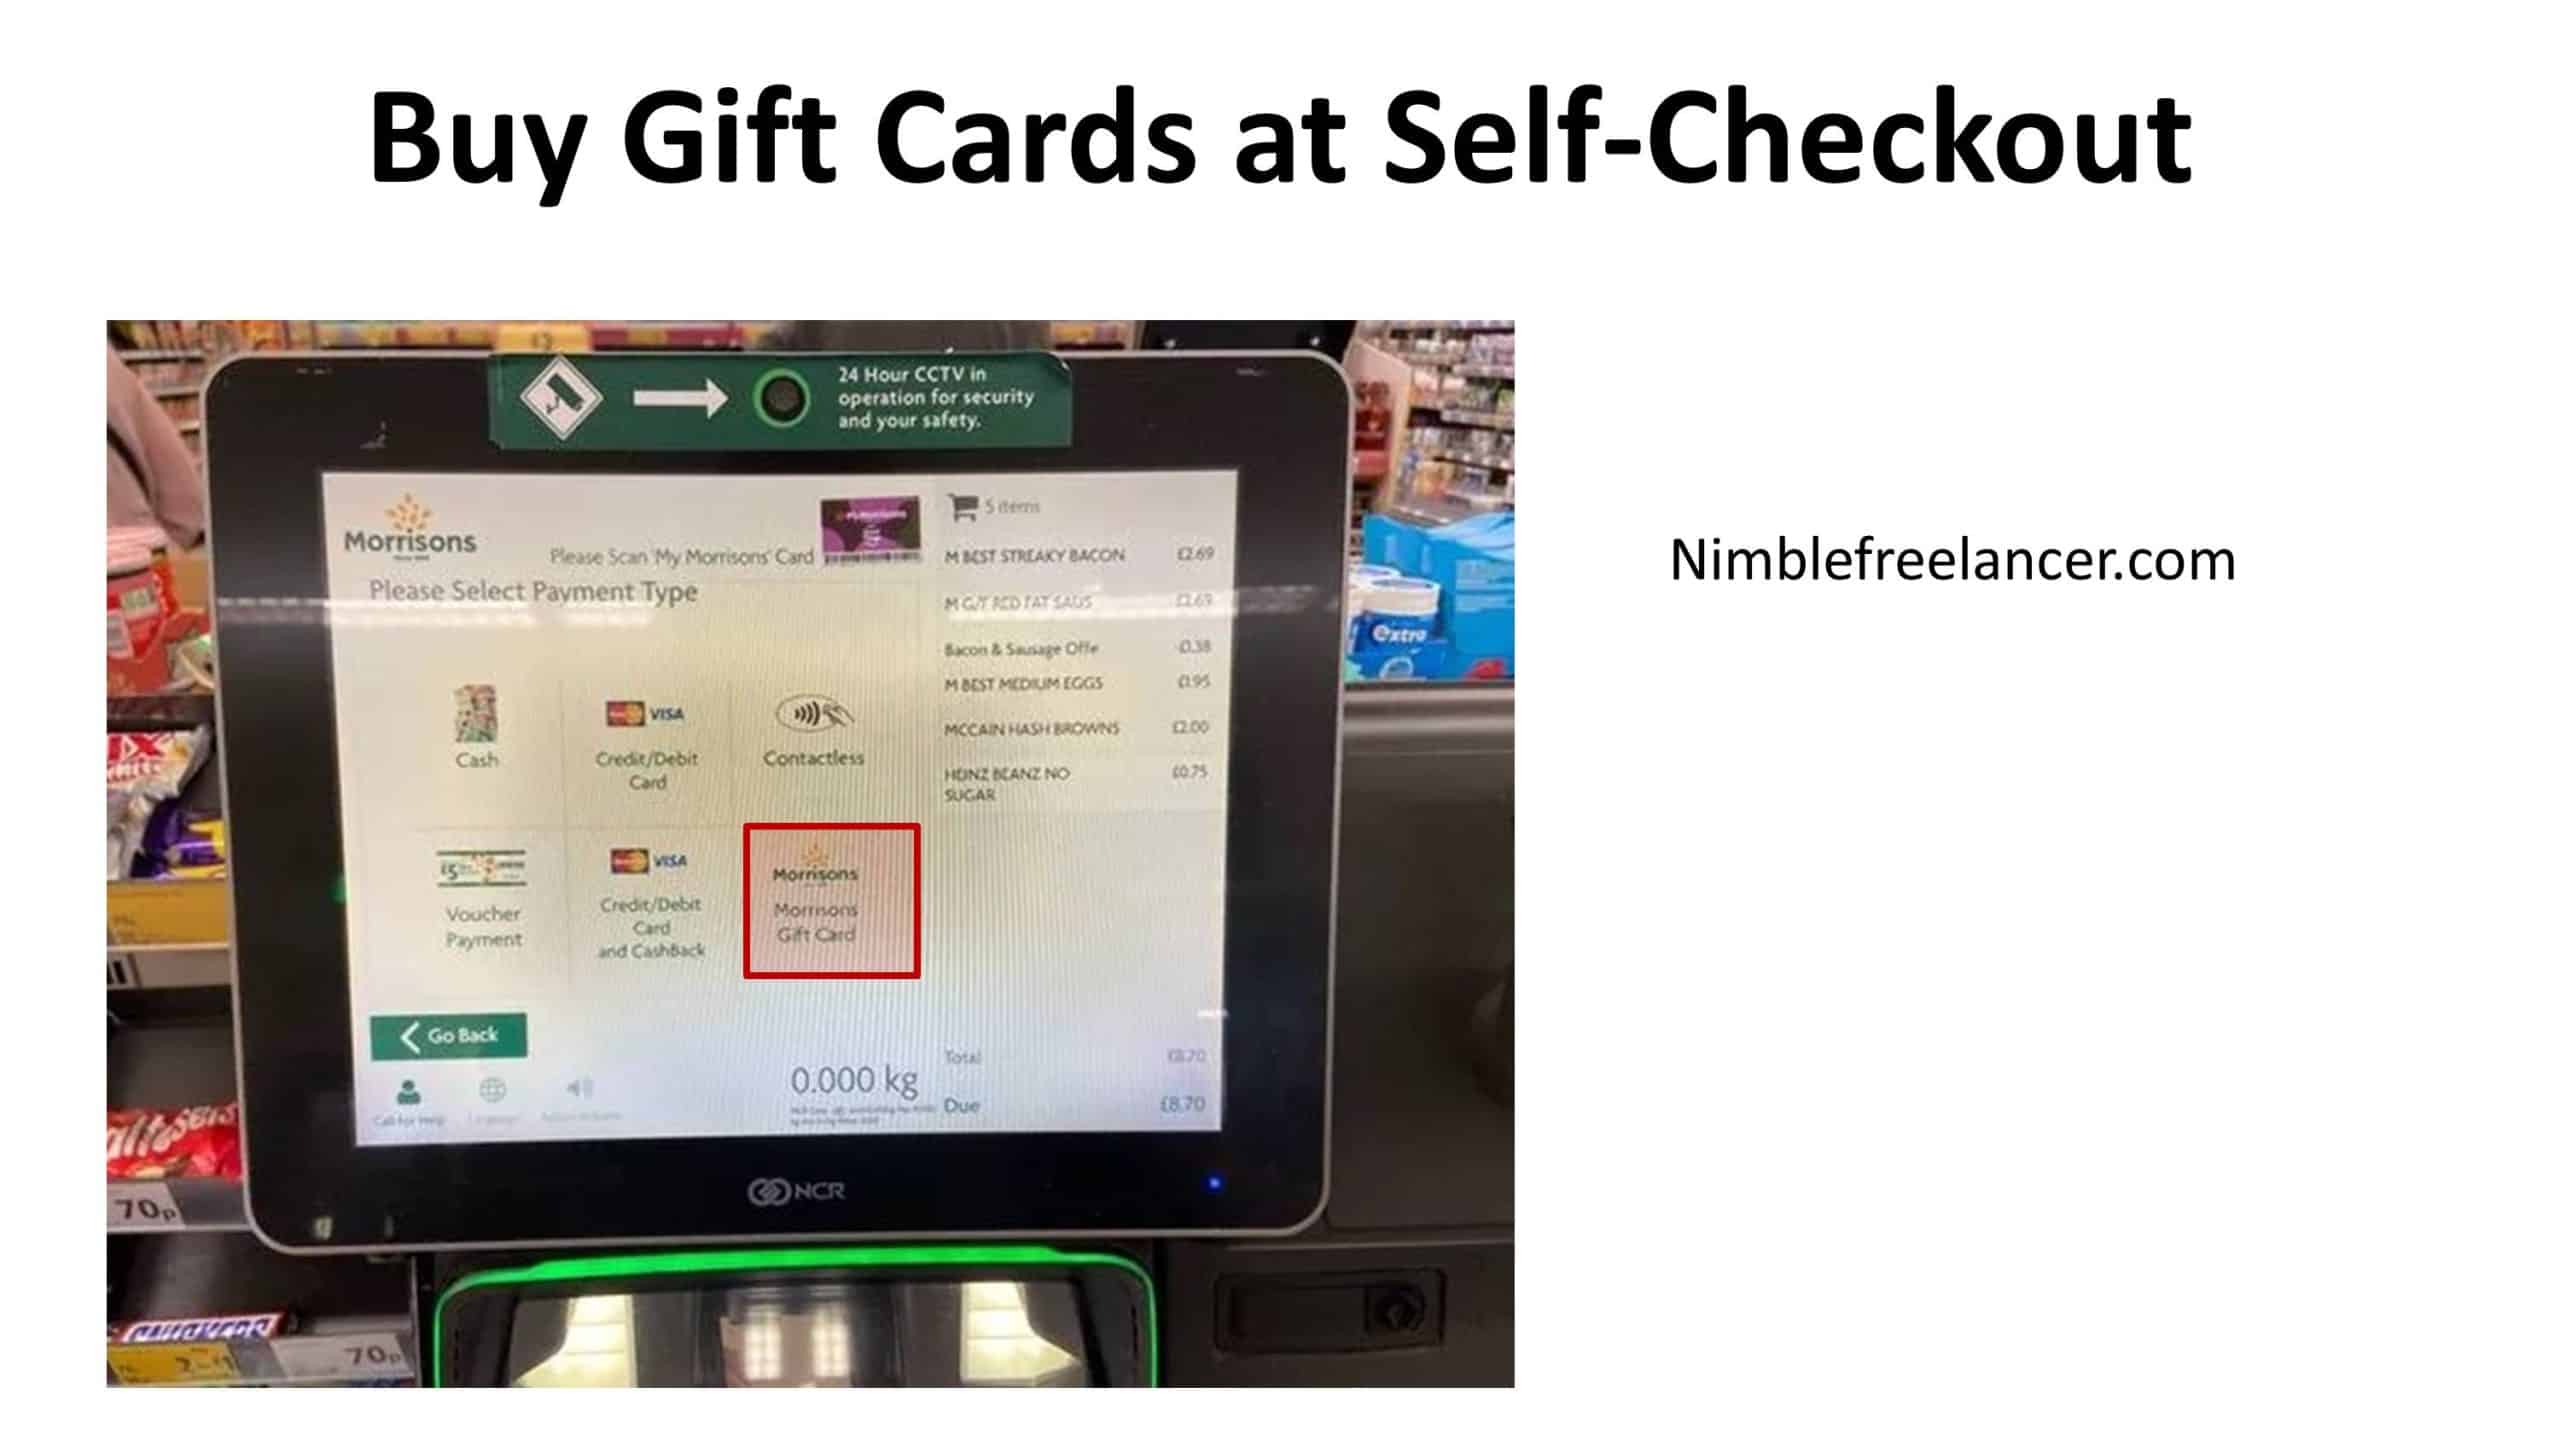 Buy Gift Cards at Self-Checkout example